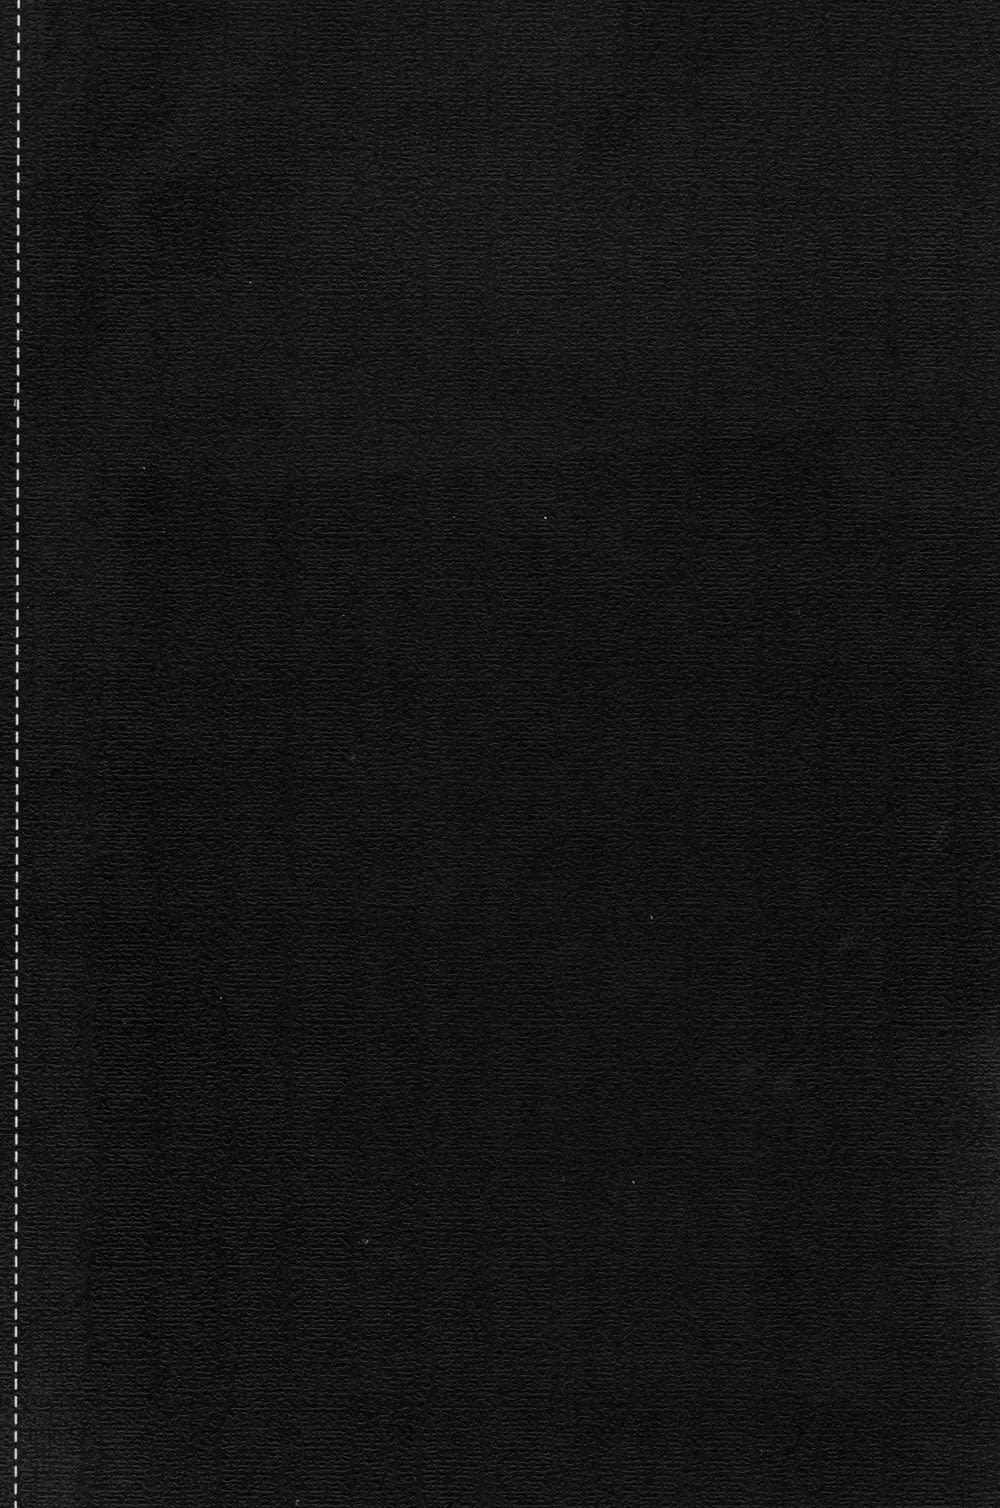 a black book with white stitching on the cover